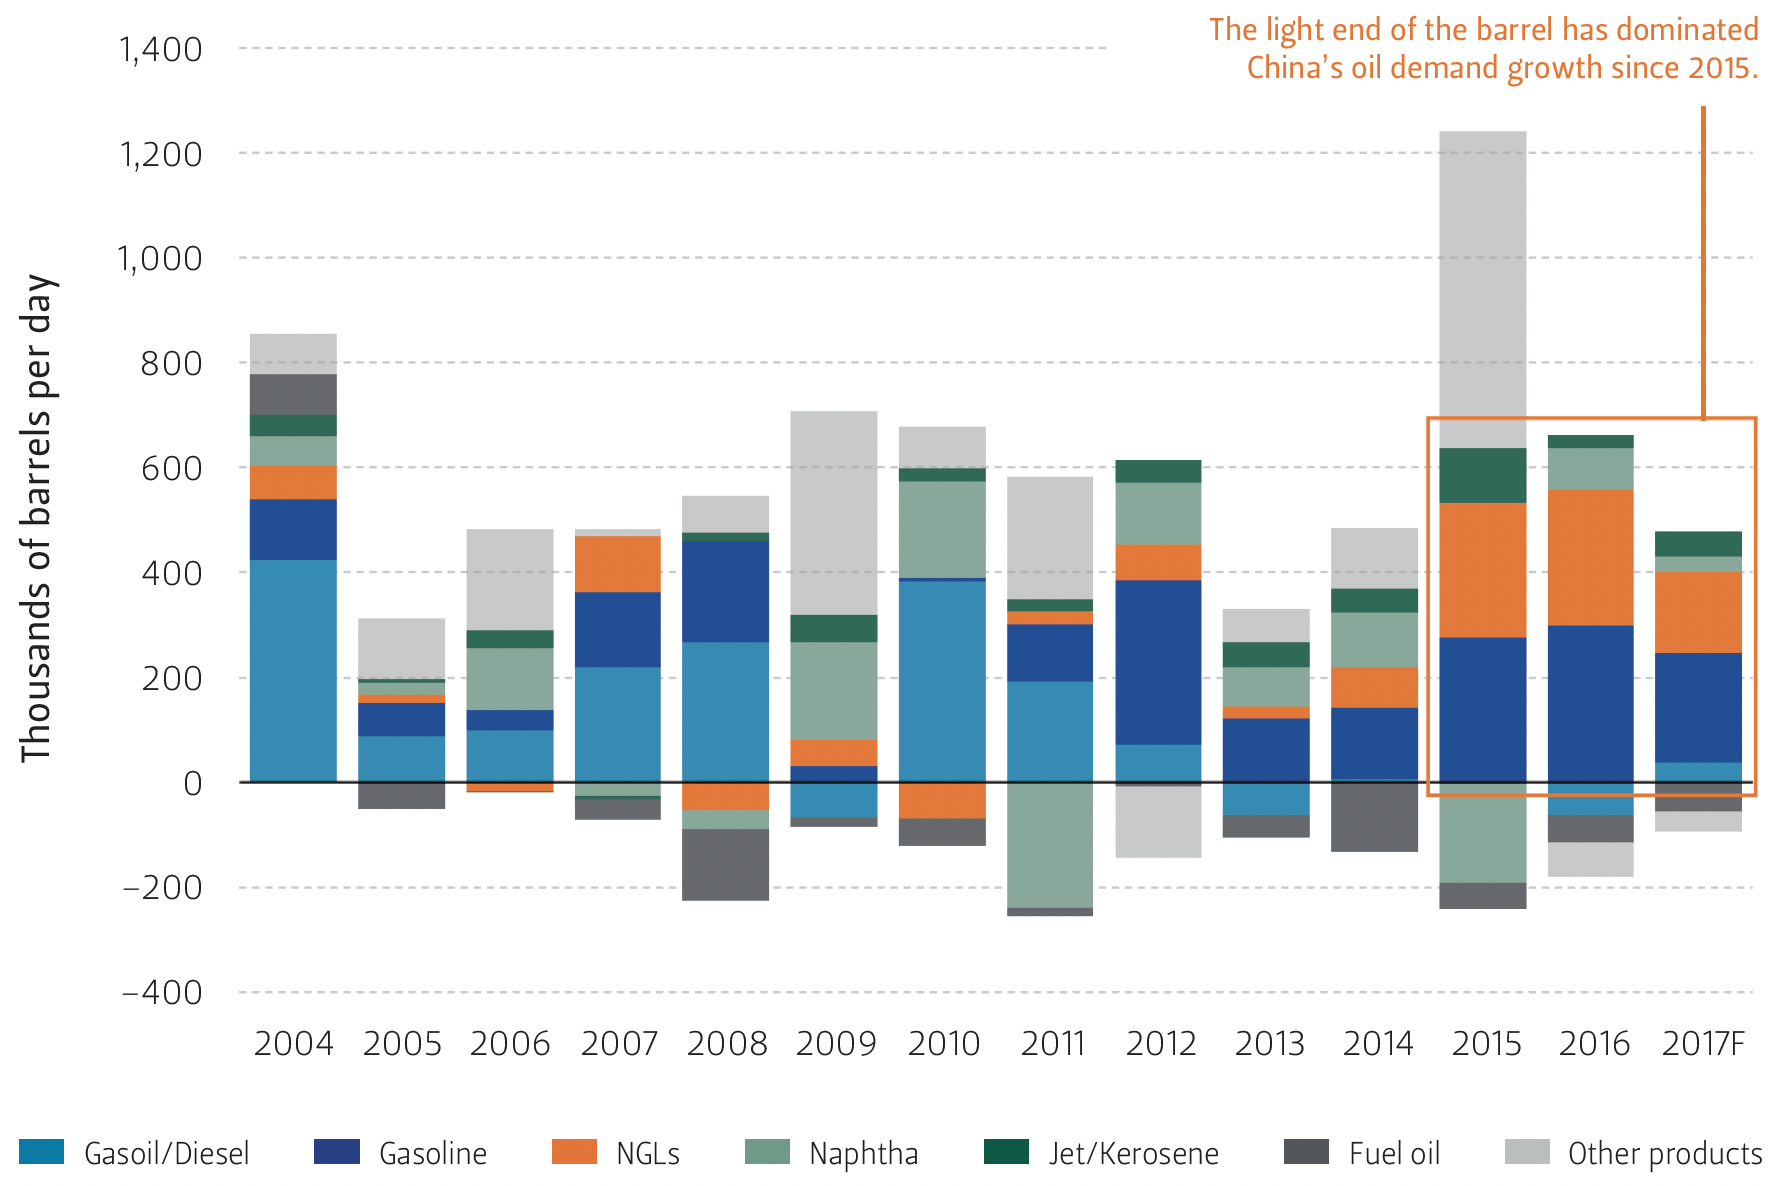 This graph shows that China’s oil products demand growth has been dominated by the light end of the barrel over time.